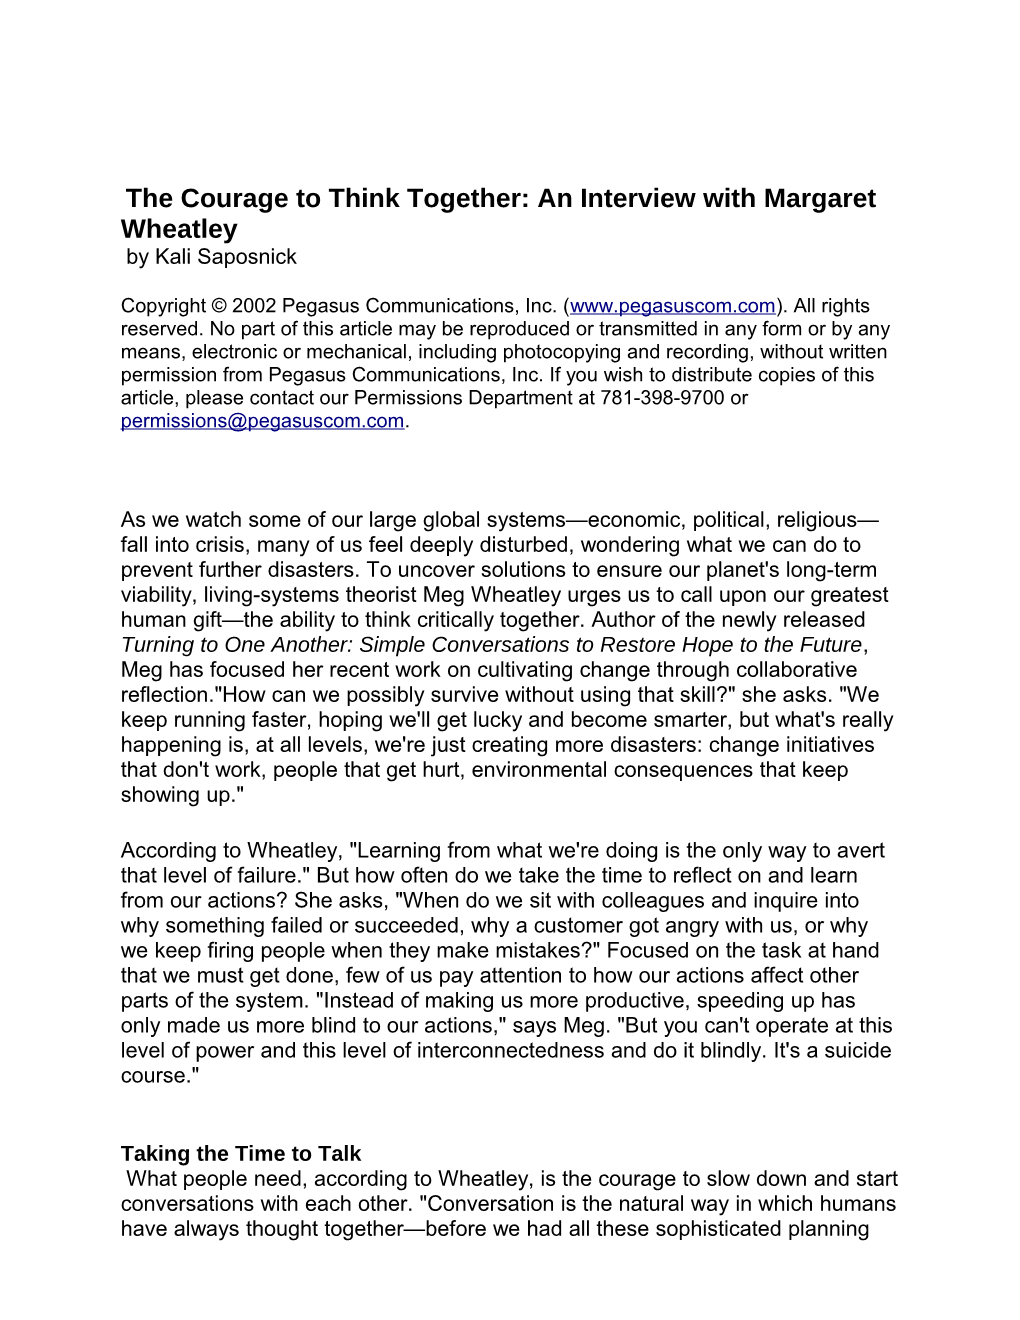 The Courage To Think Together: An Interview With Margaret Wheatley